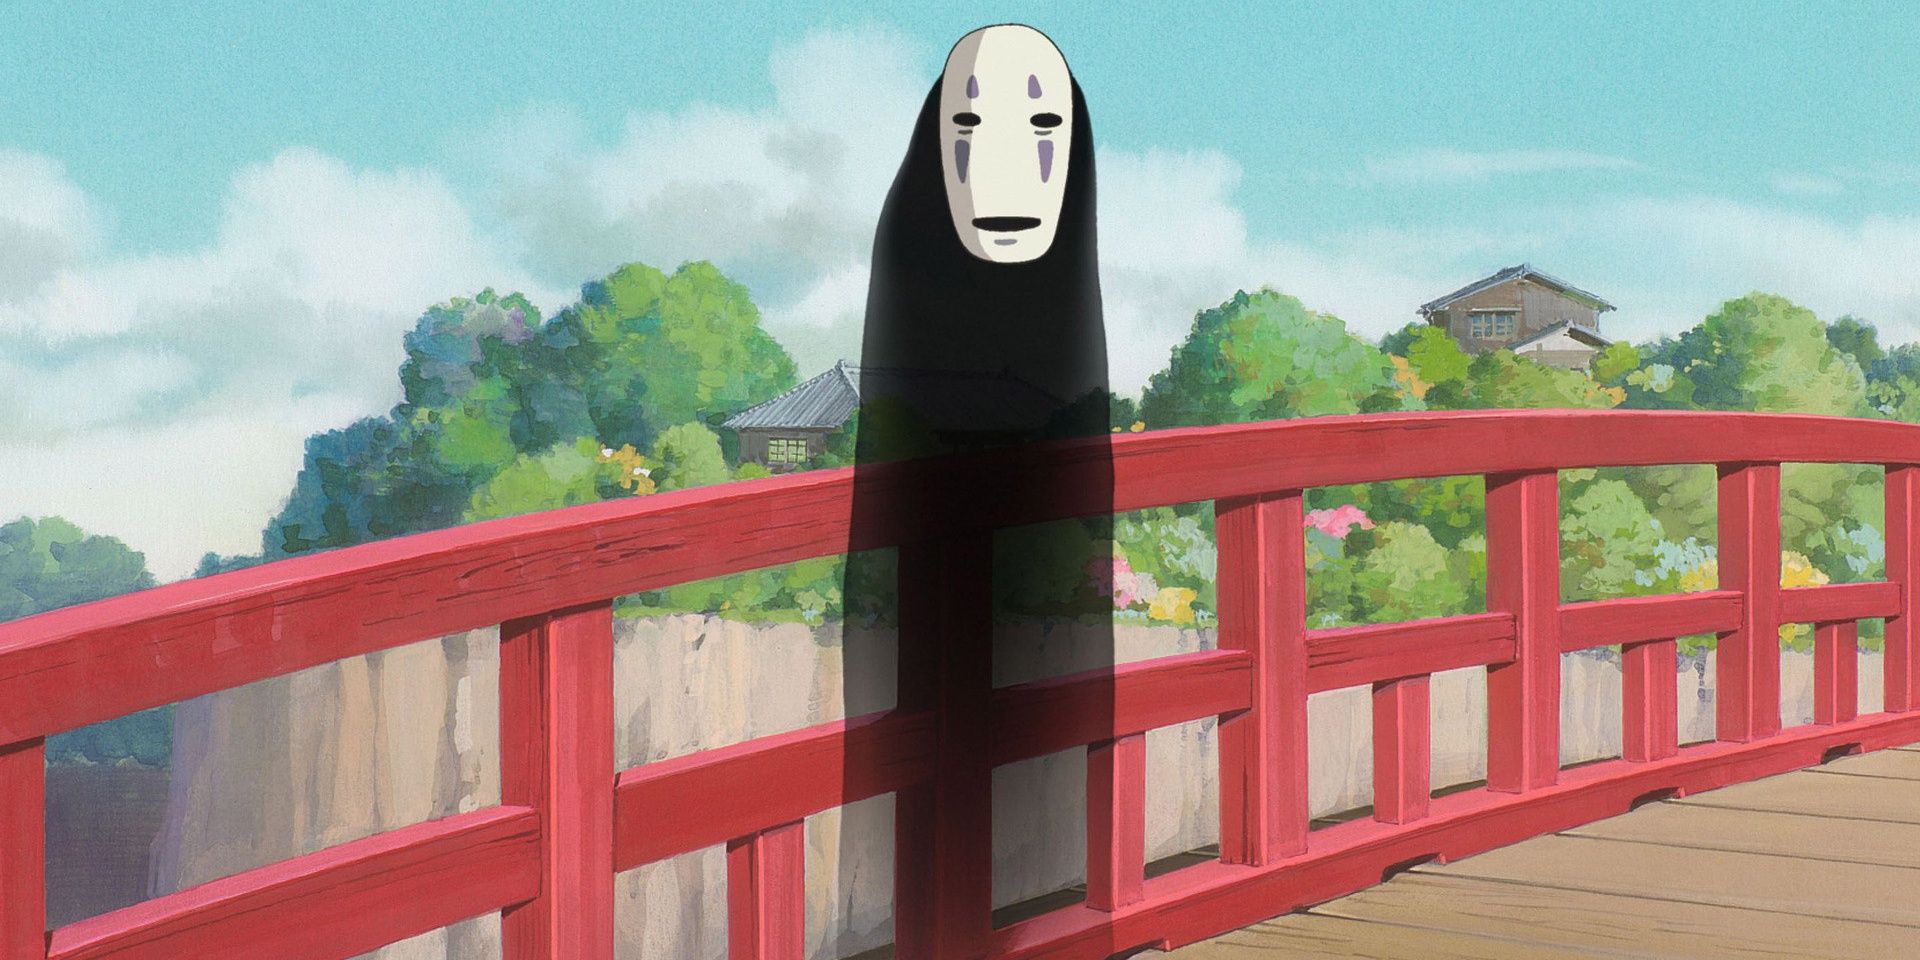 No Face stands on a bridge in Spirited AWAY